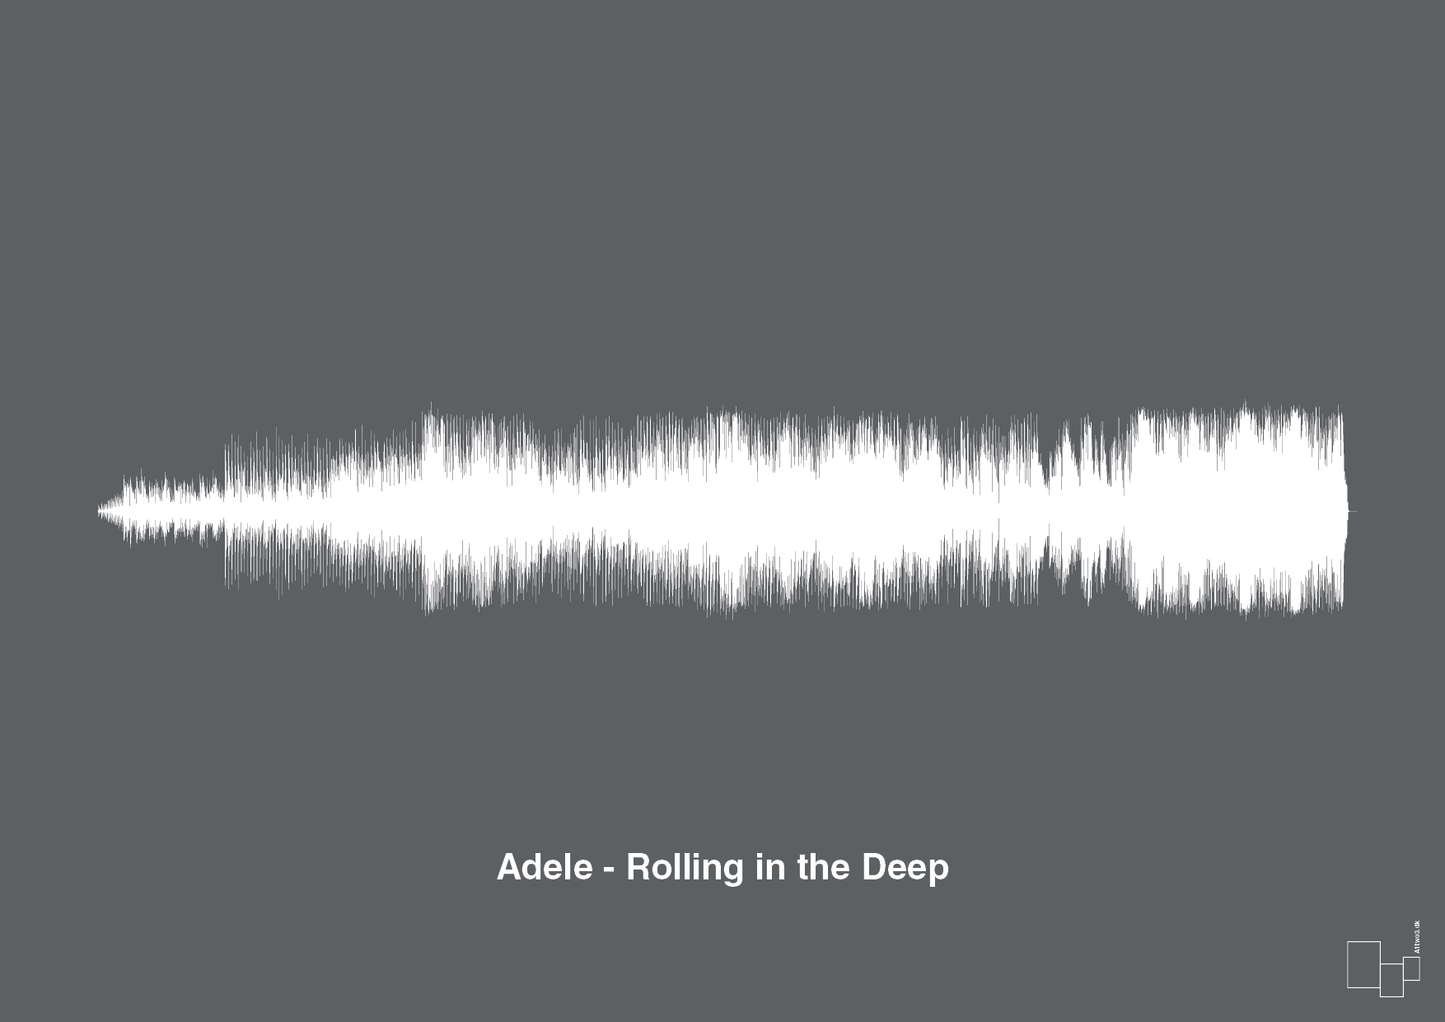 adele - rolling in the deep - Plakat med Musik i Graphic Charcoal